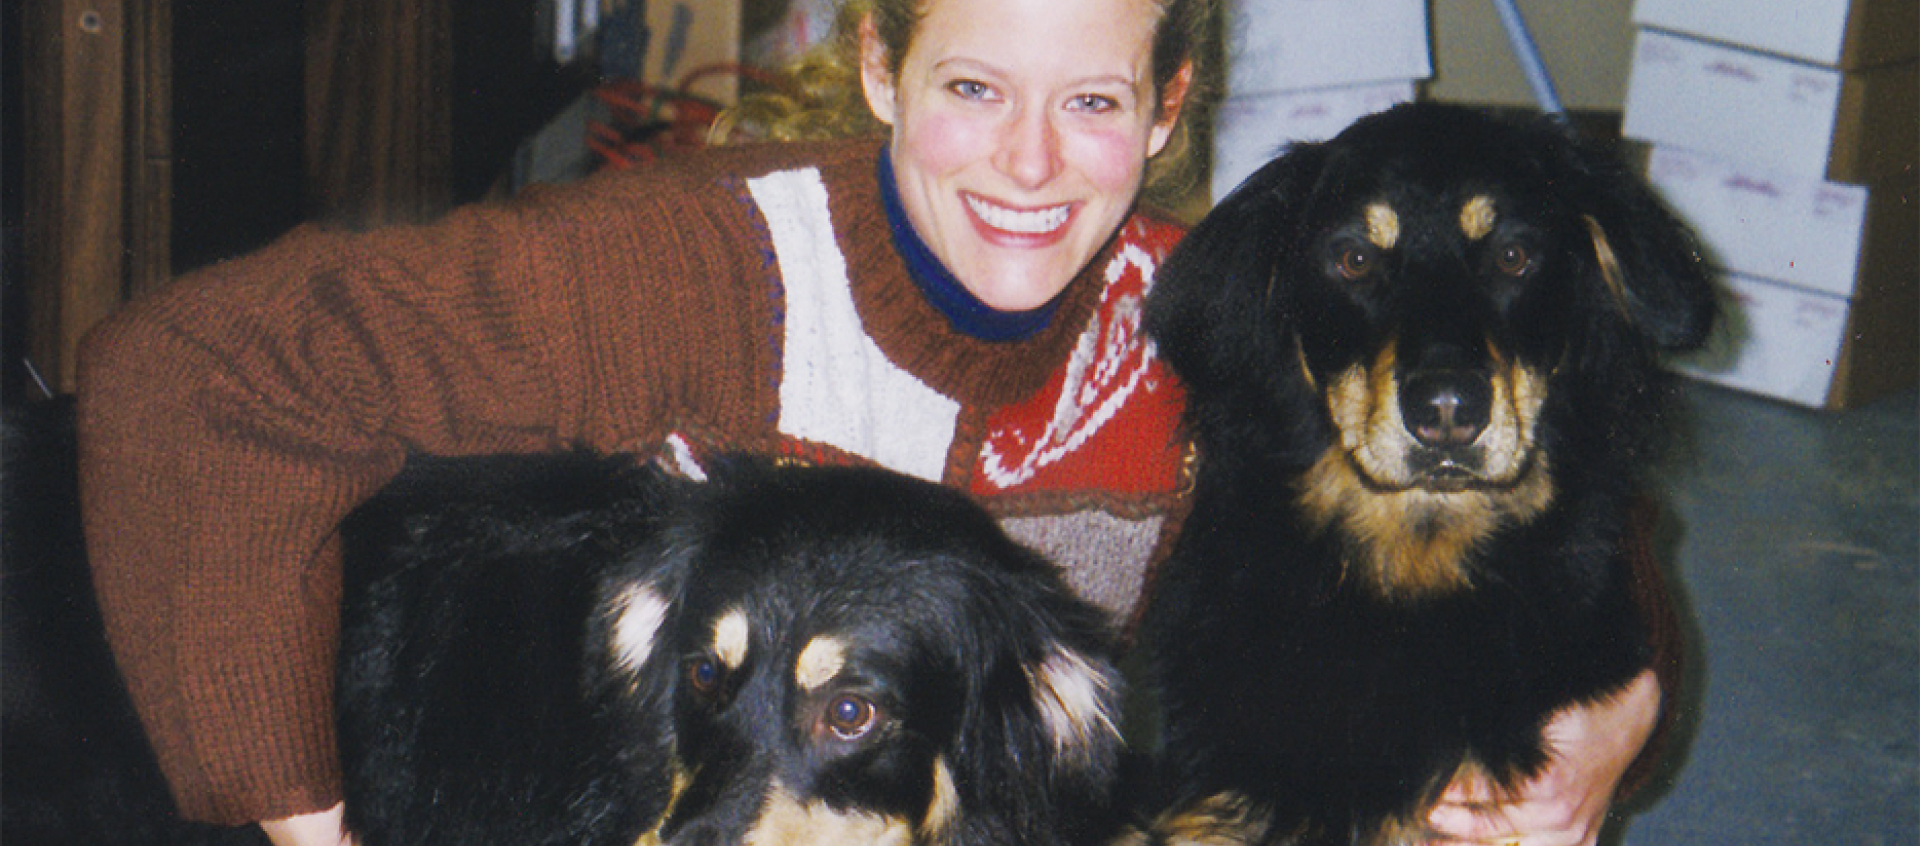 A woman is posing for a picture with two dogs.